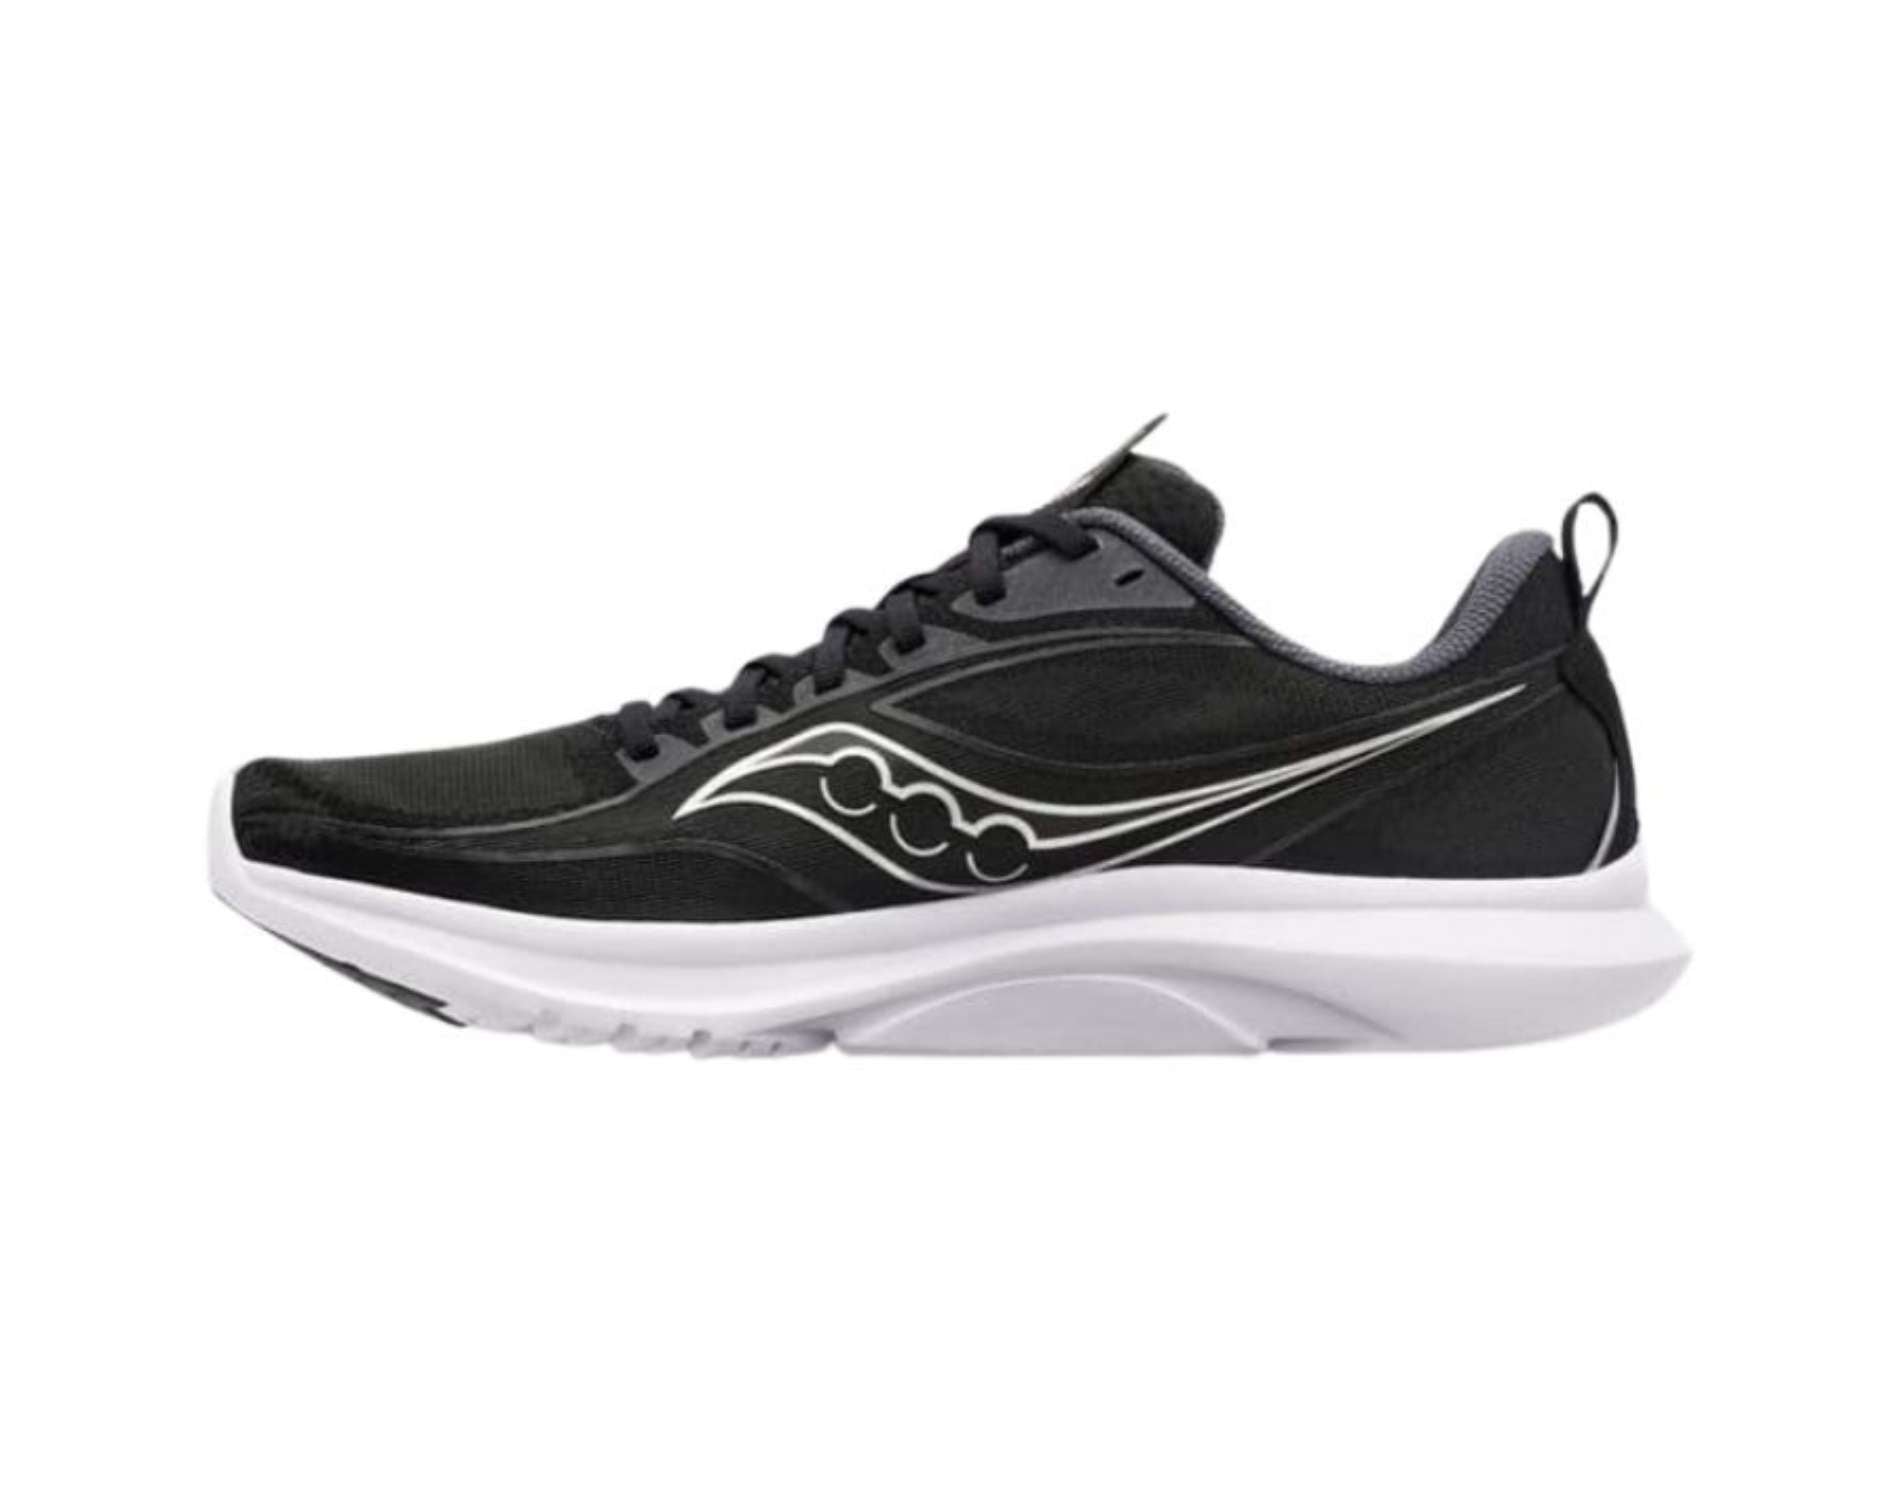 Saucony Kinvara 13 d mens runner in standard width in black and silver colour